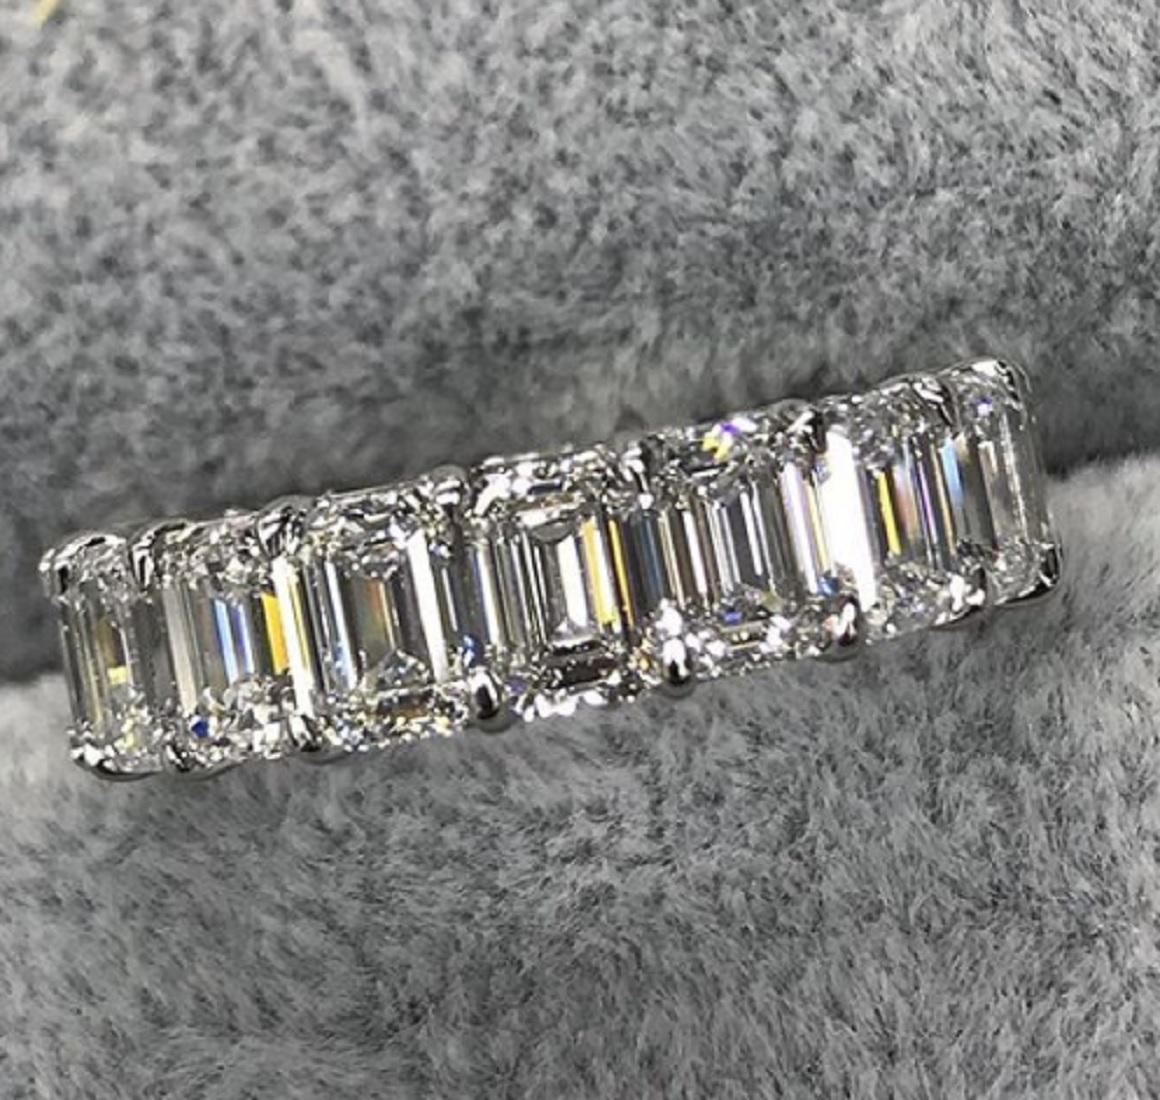 8 carats emerald cut diamond eternity band ring
VS CLARITY
F COLOR 
EXCELLENT CUT DIAMONDS
18 CARATS WHITE GOLD SETTING
REQUIREMENT OF TIME 14 DAYS TO BE READY TO SHIP